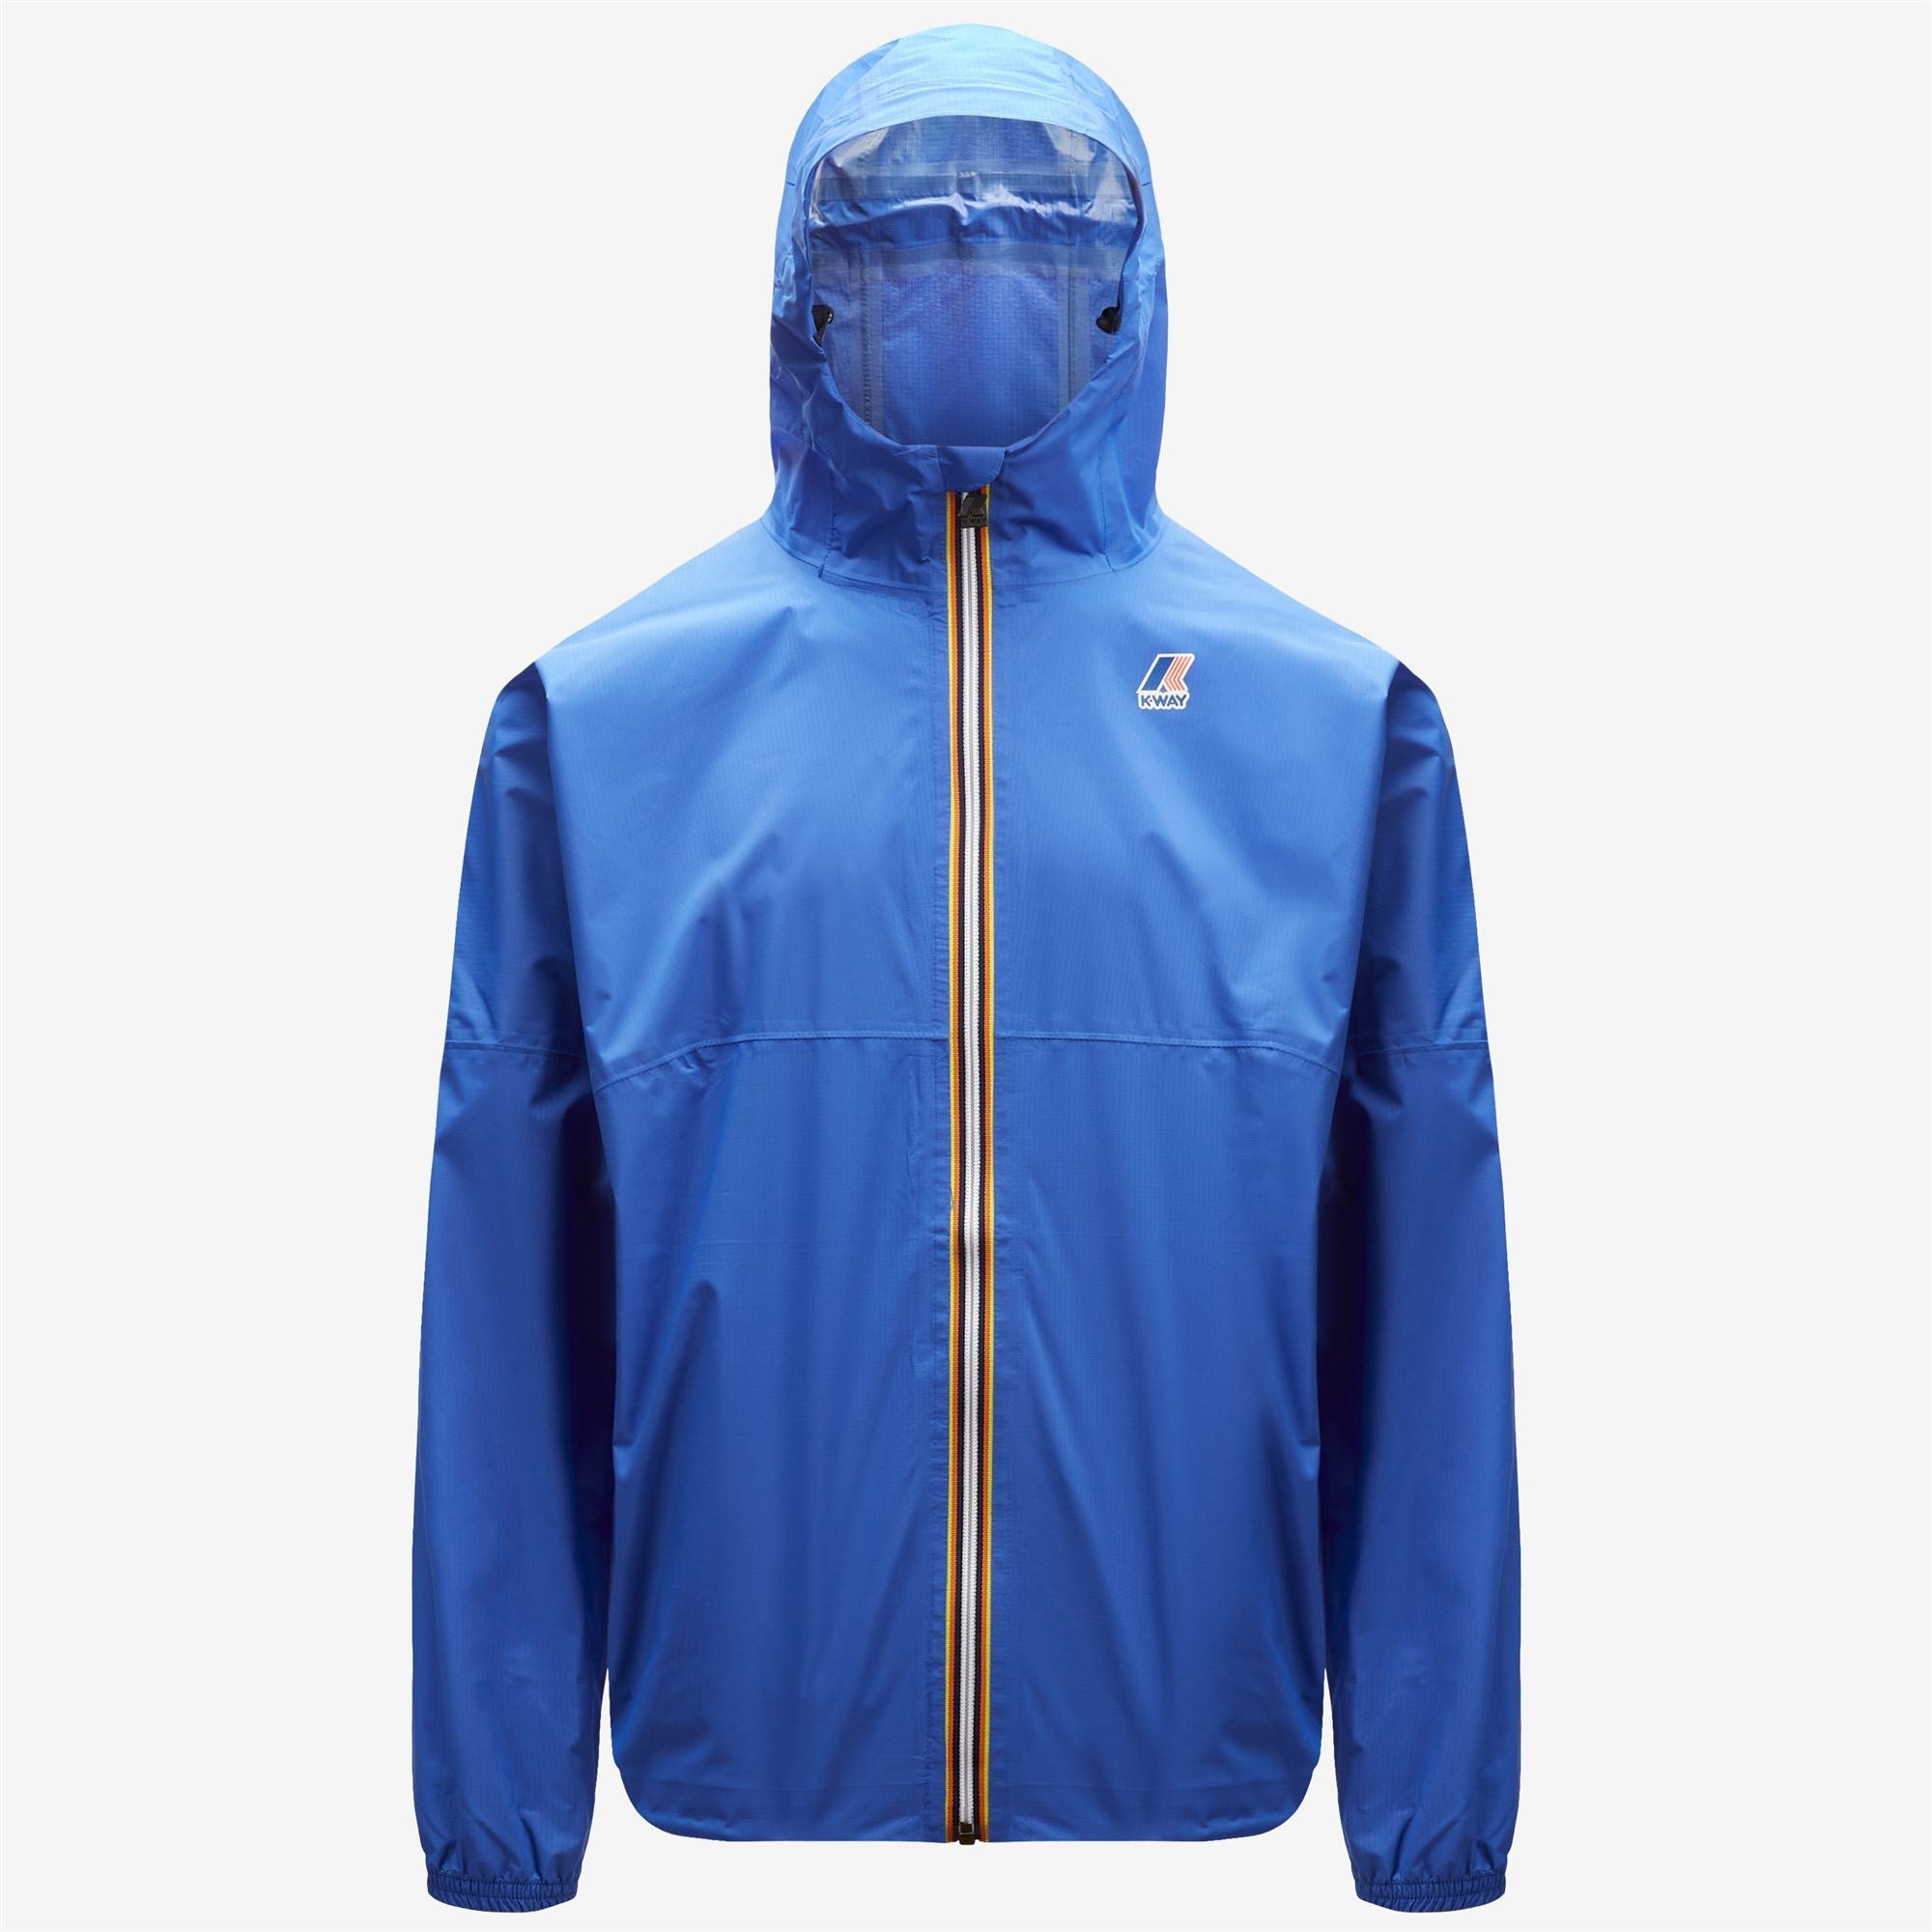 Amiable Claude Packable Full Zip Rain Recycled Jacket in Blue RoyalàAmiable Claude Packable Full Zip Rain Recycled Jacket in Blue Royal